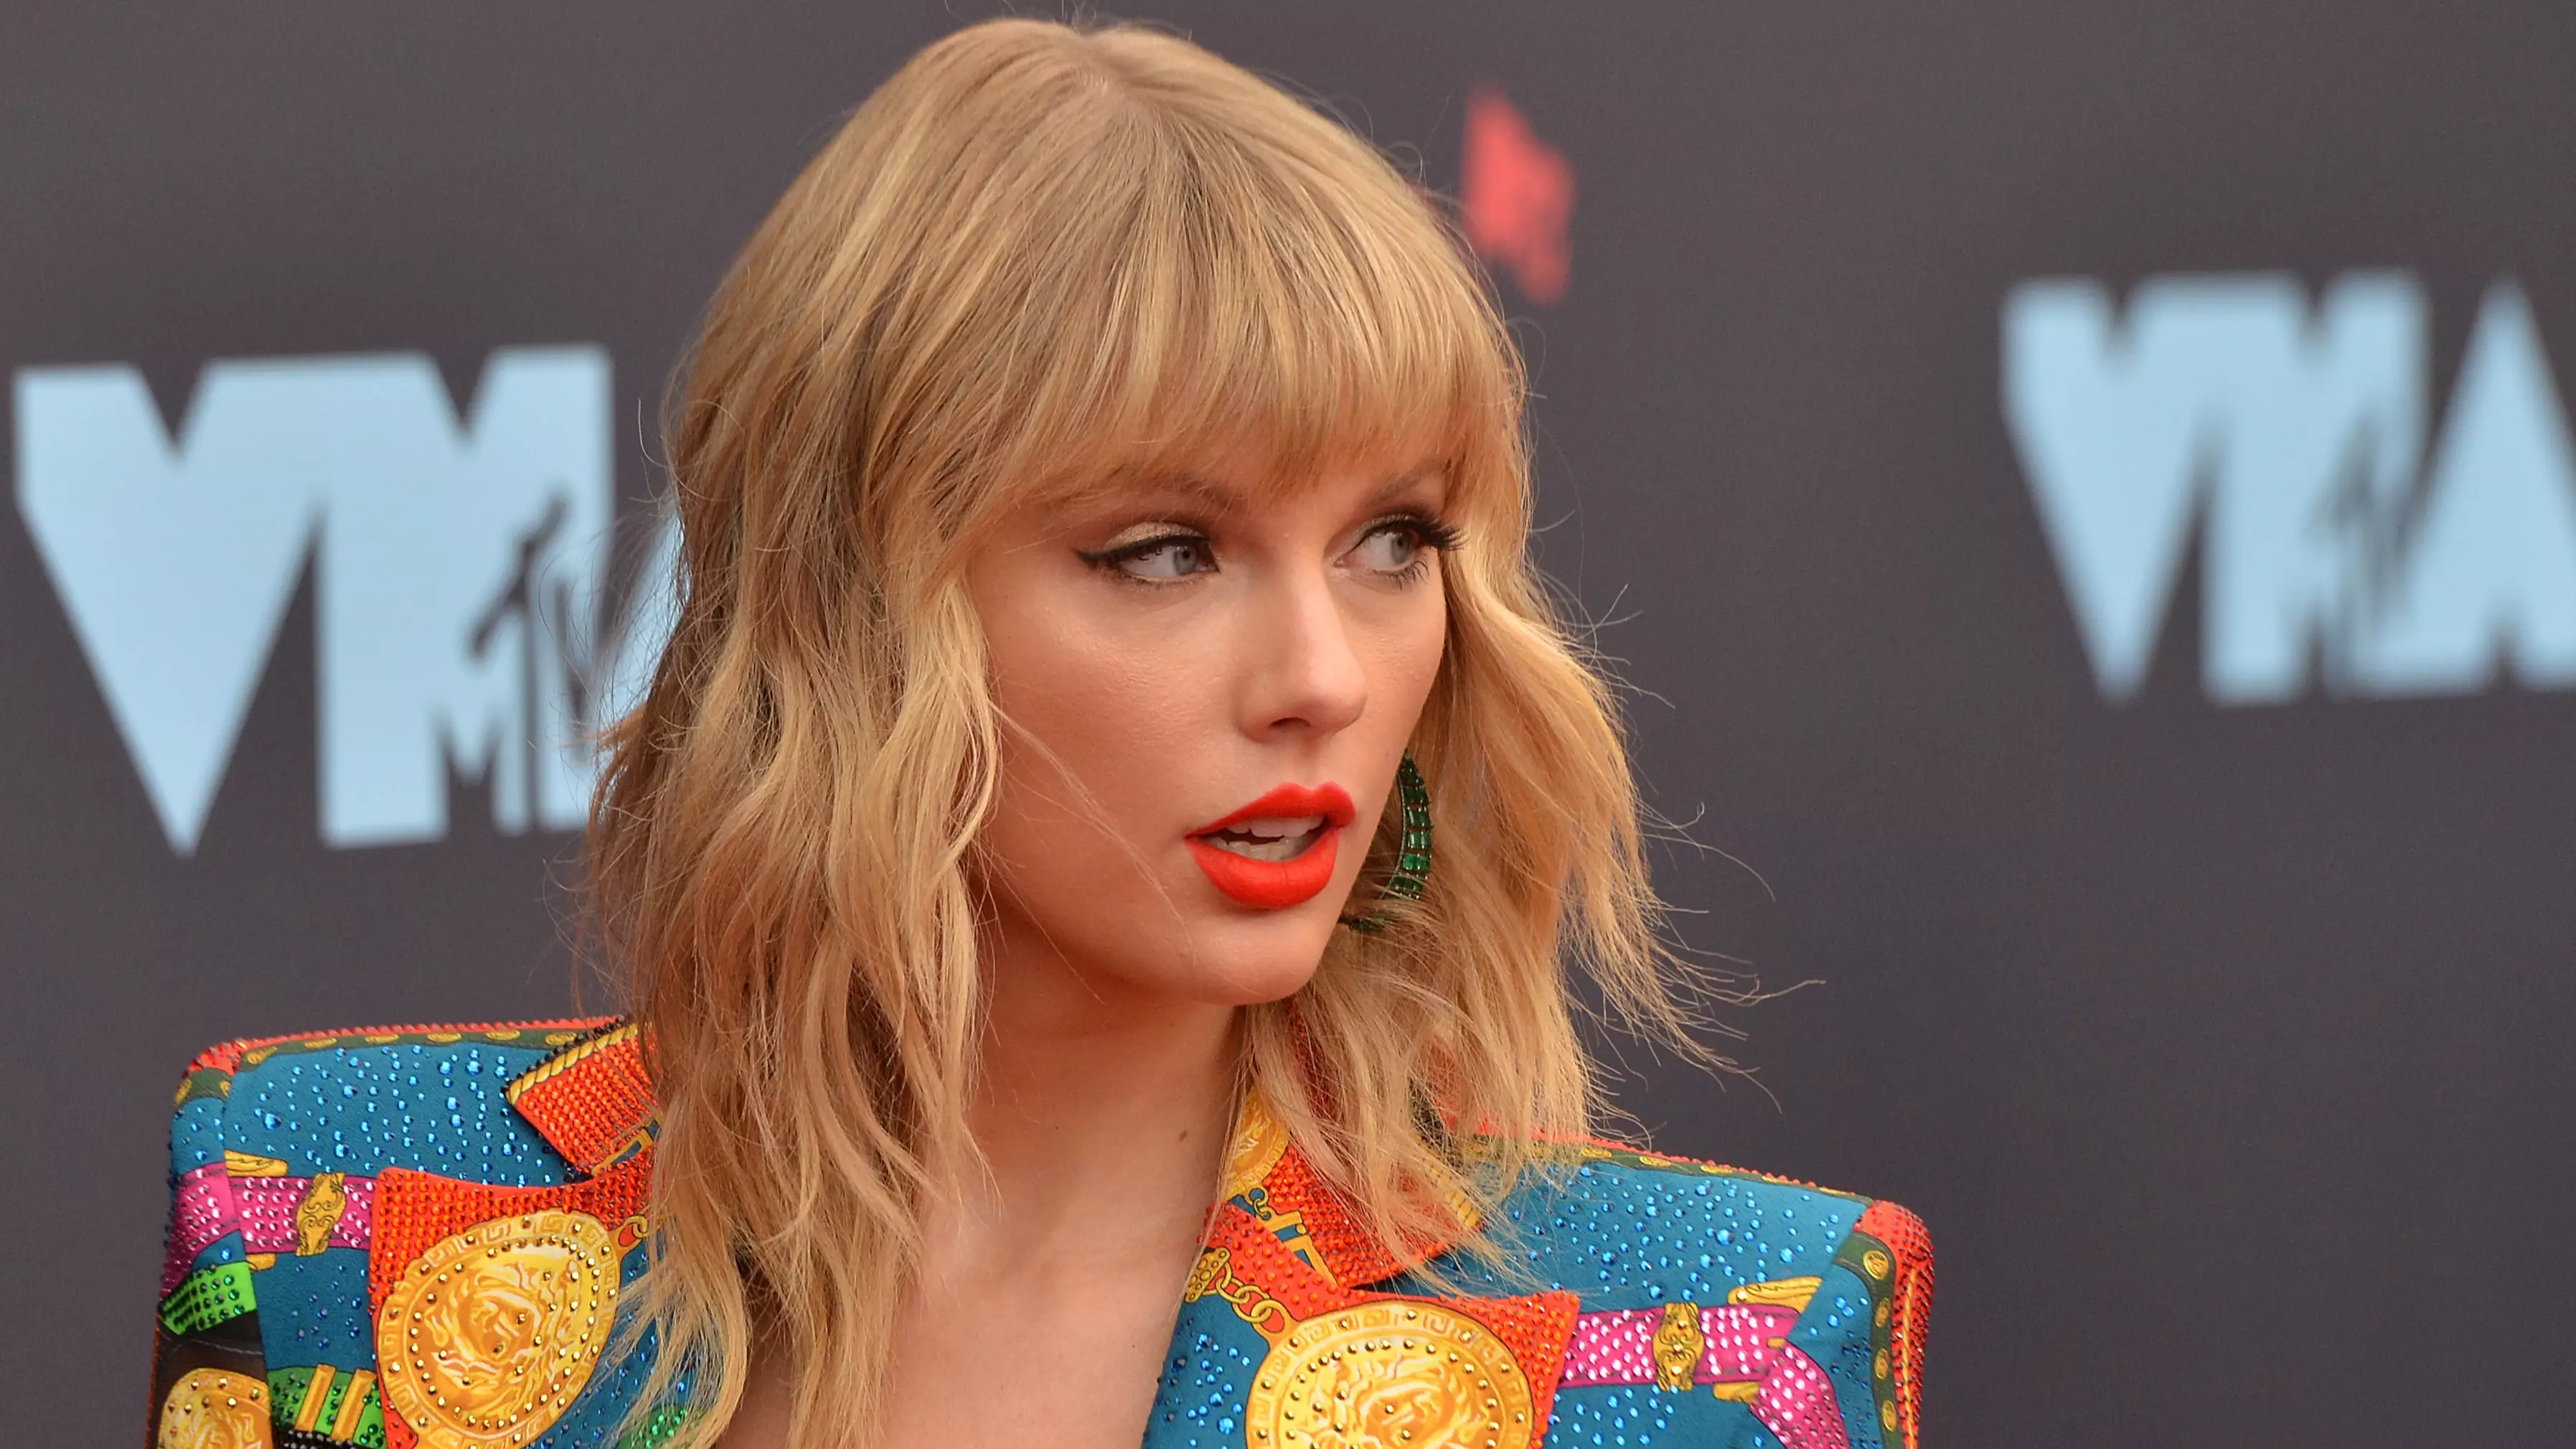 Taylor Swift Under Fire From Animal Welfare Activists For Agreeing To Perform At Melbourne Cup 2019